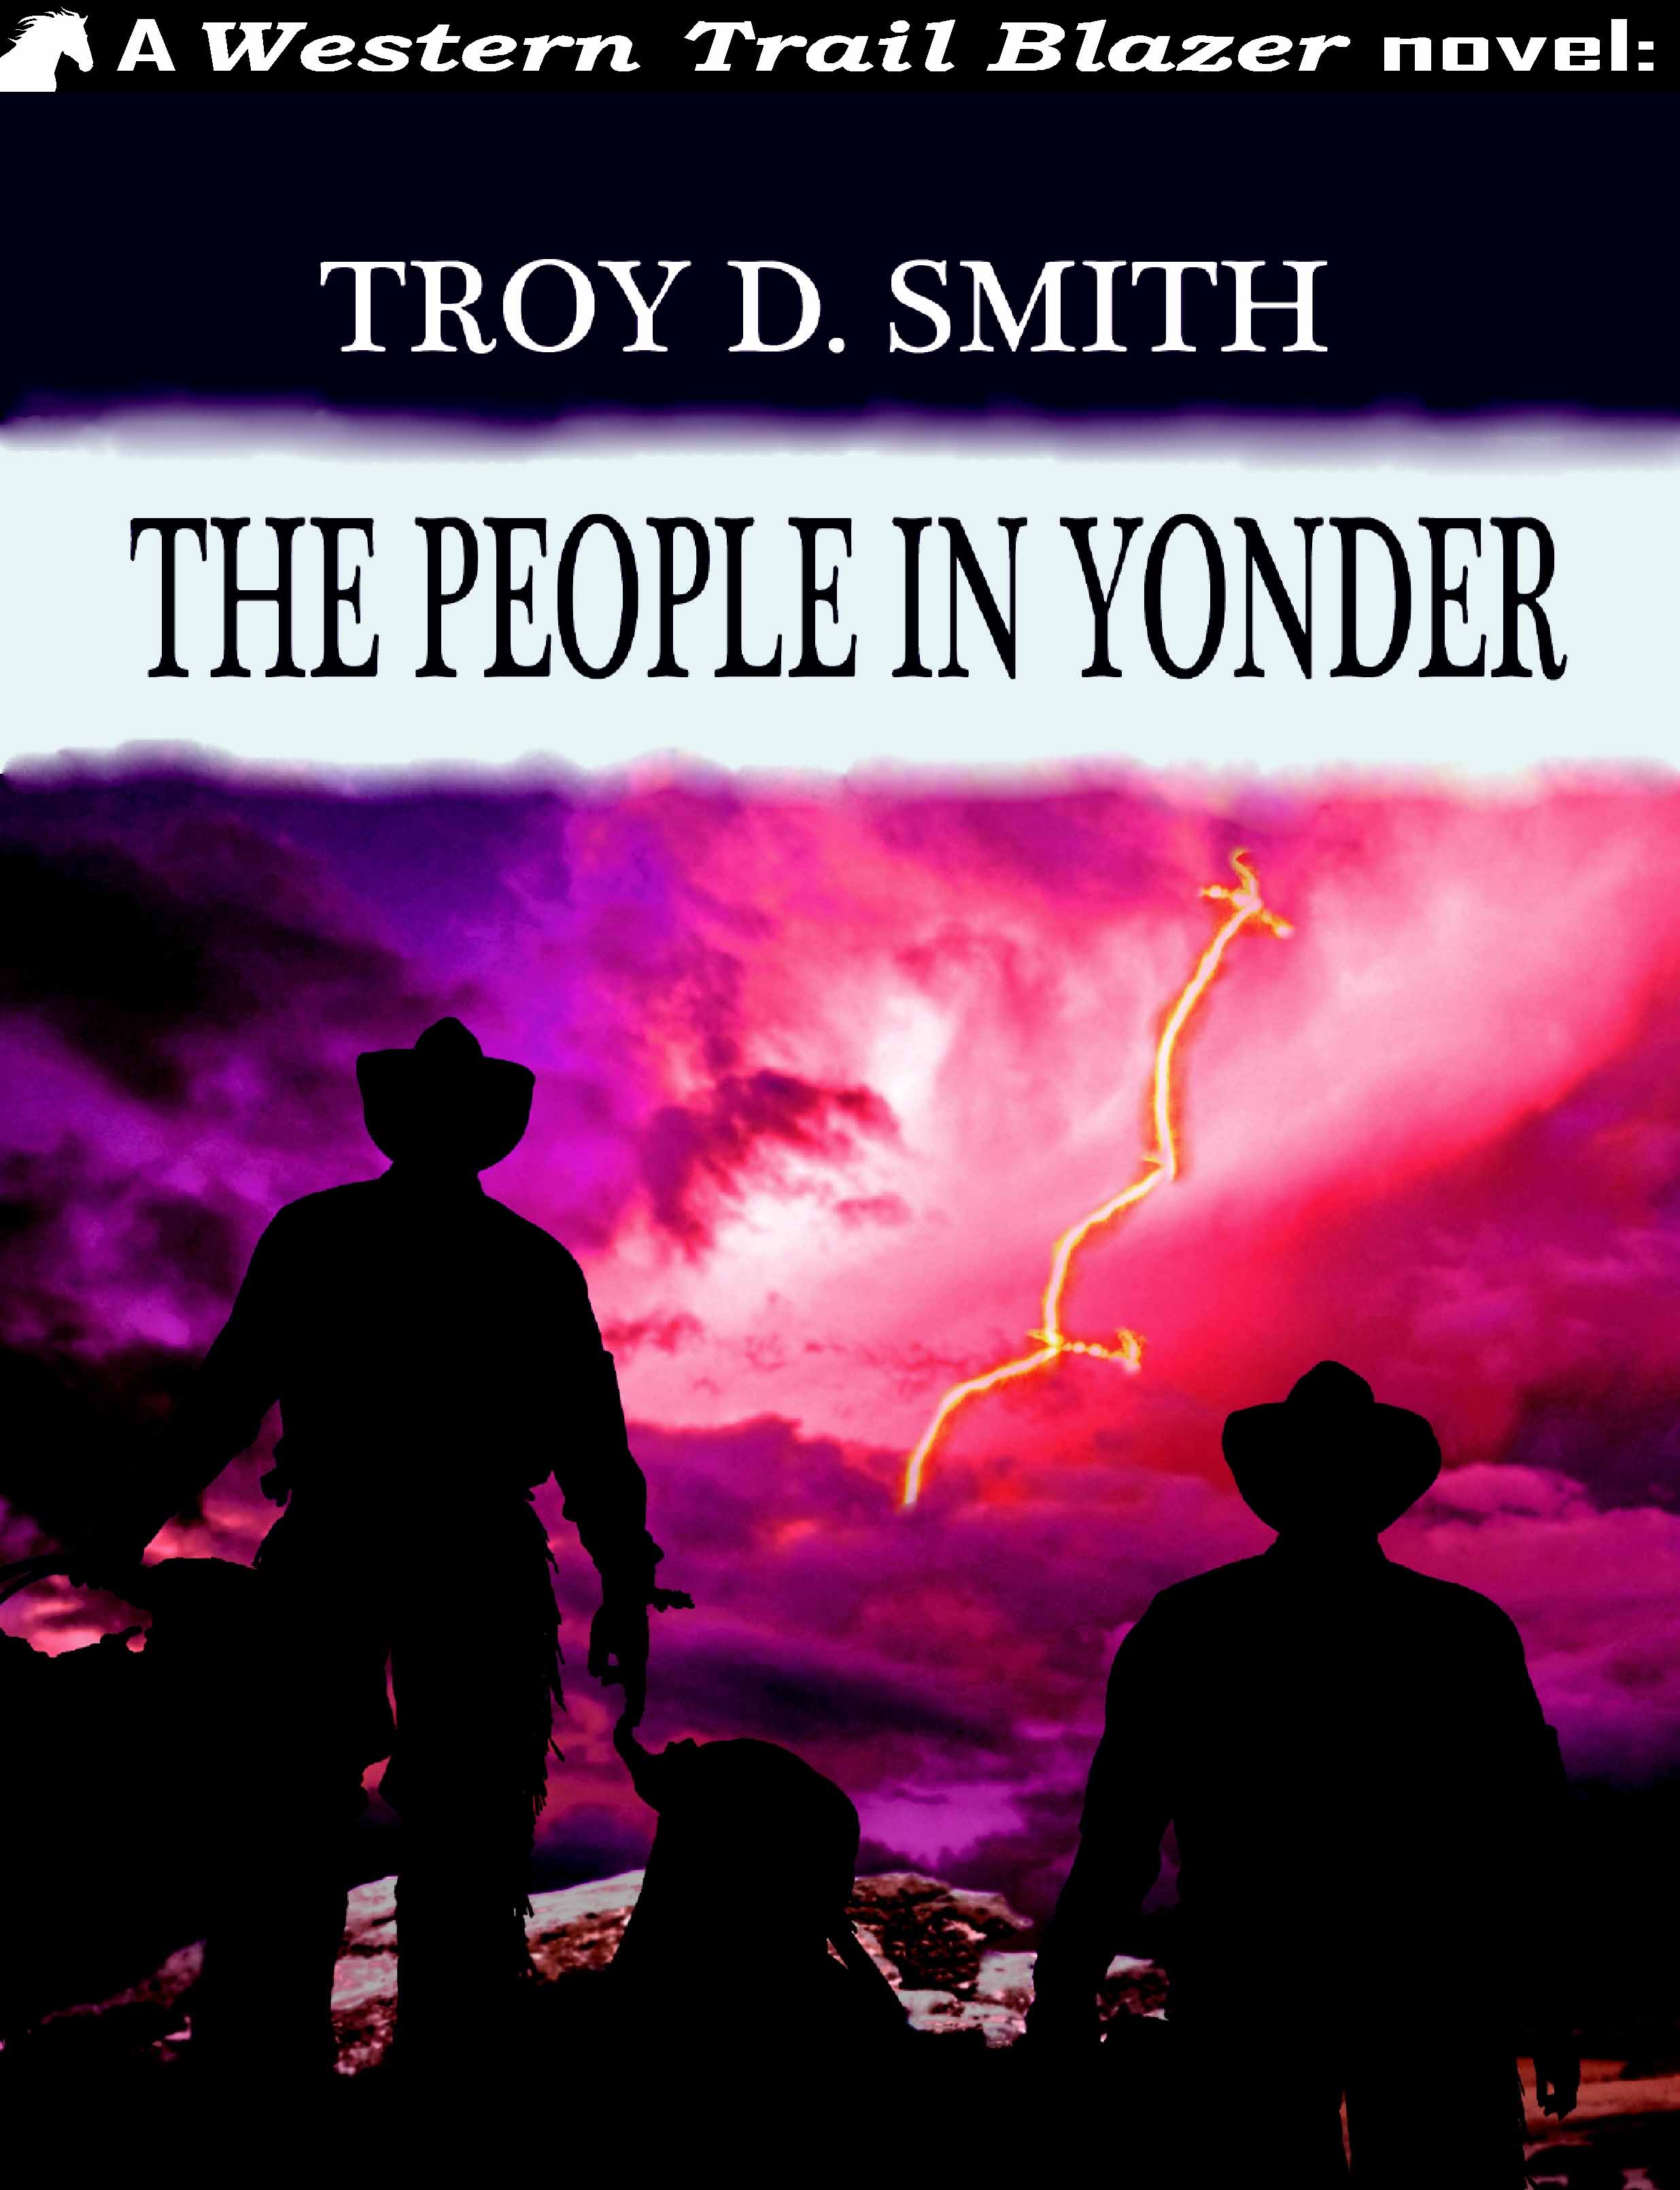 The People in Yonder Troy D. Smith